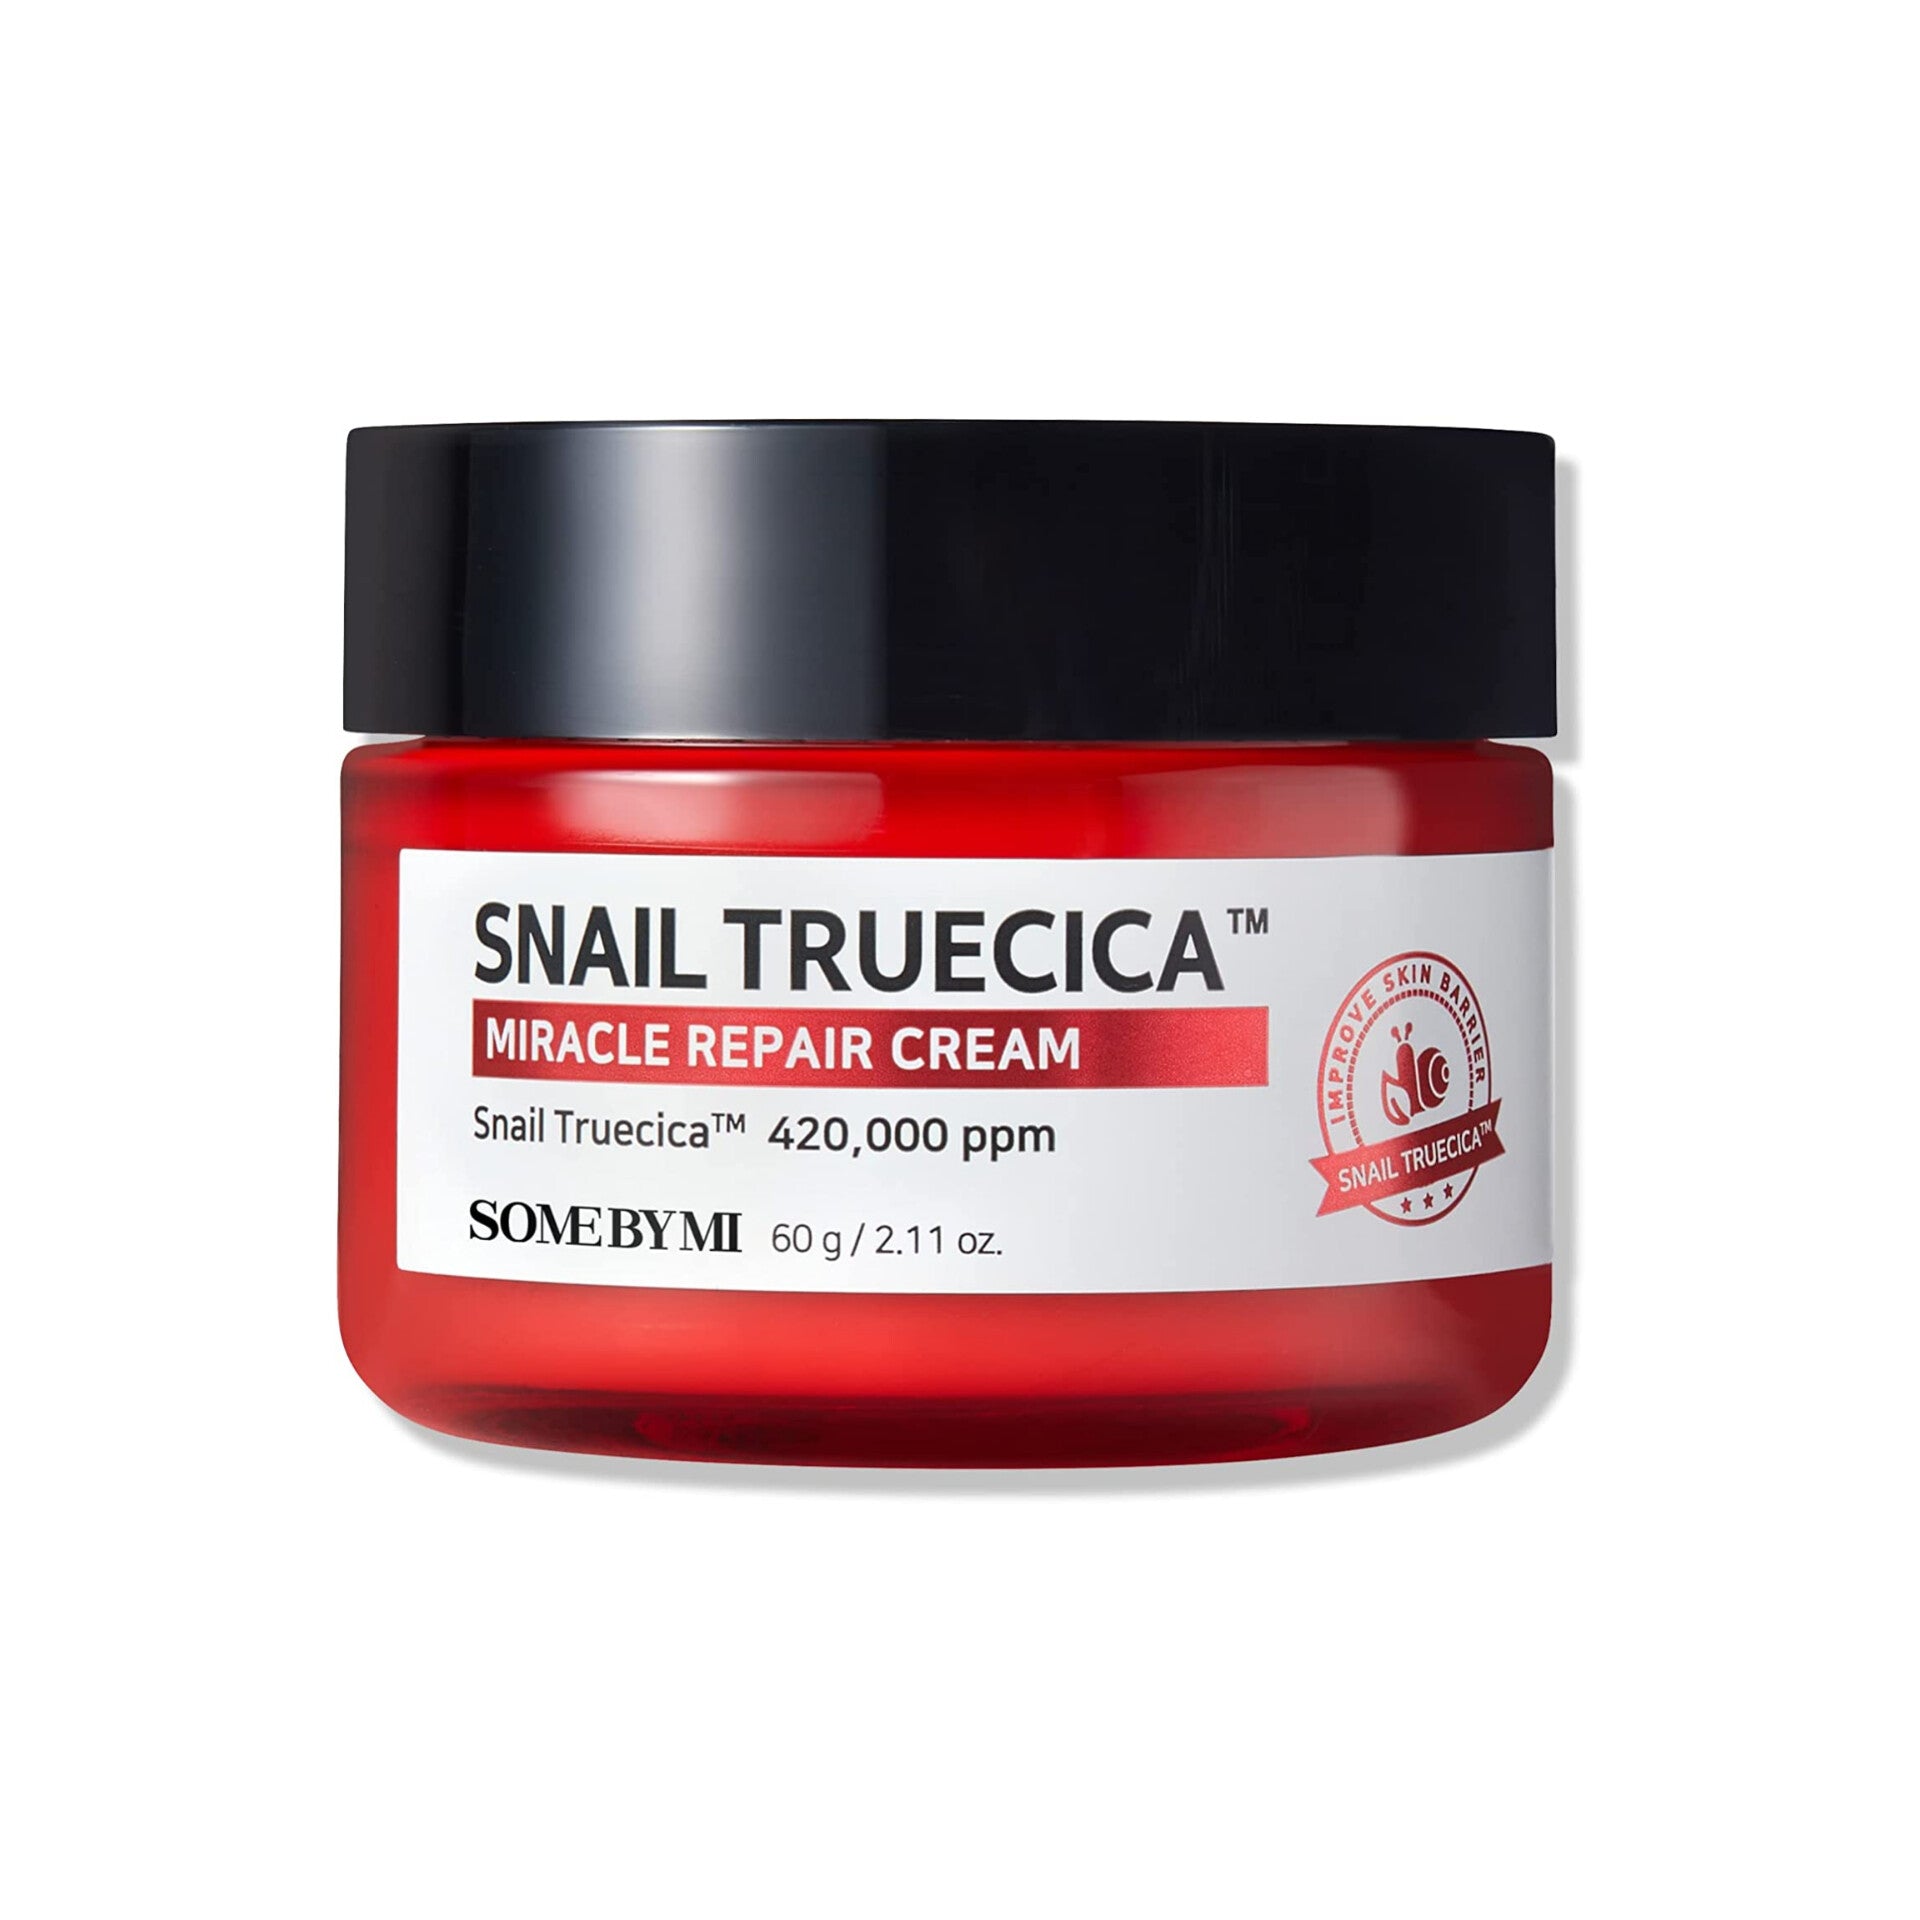 copy-of-some-by-mi-snail-truecica-miracle-cream-50ml